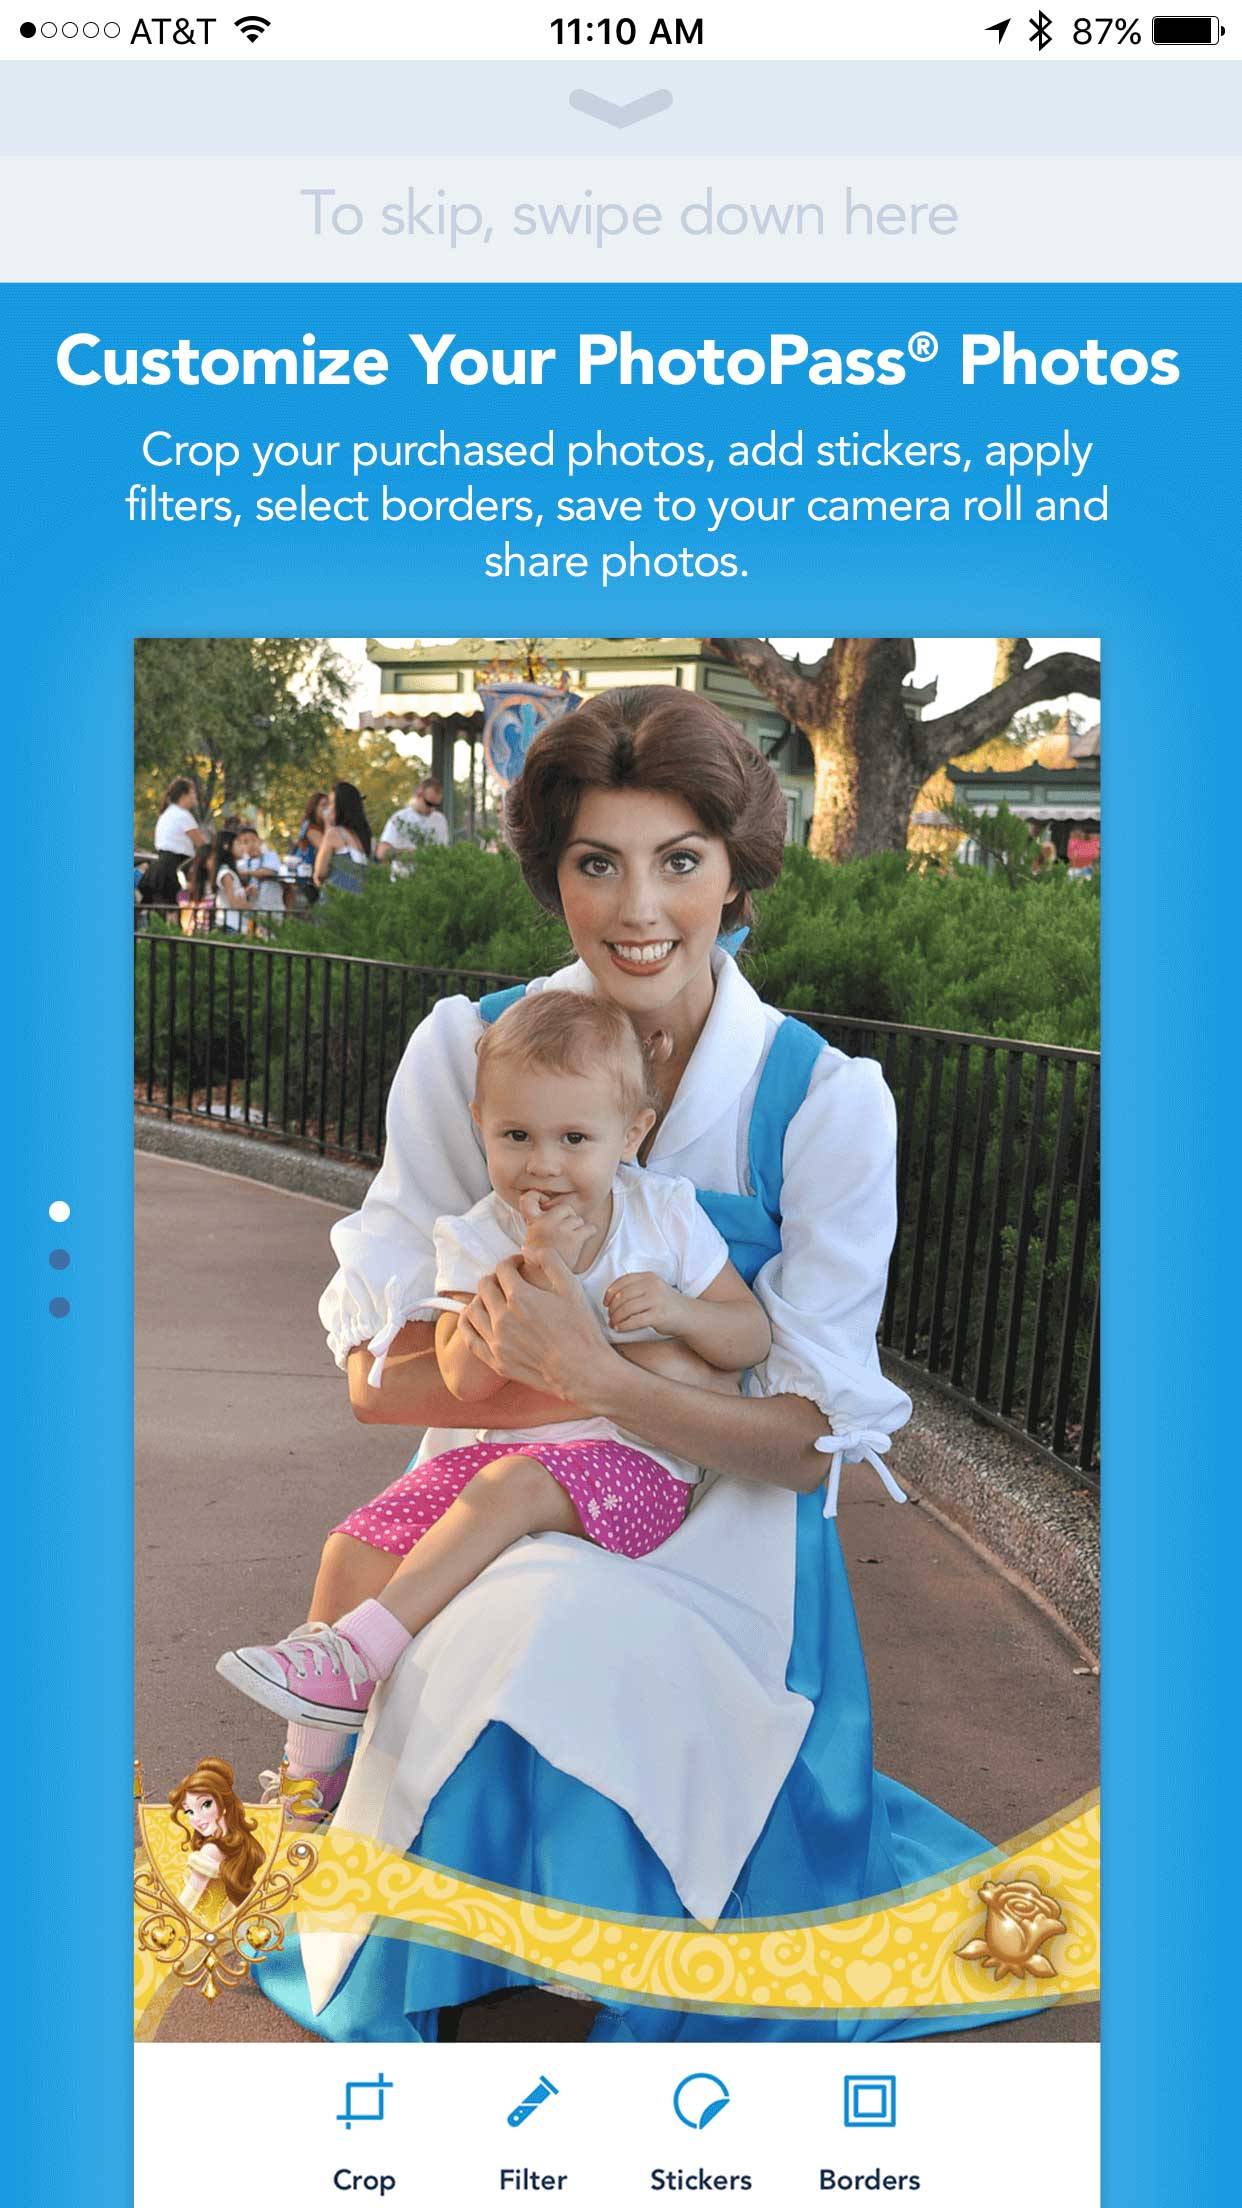 My Disney Experience app on iOS now supports PhotoPass editing